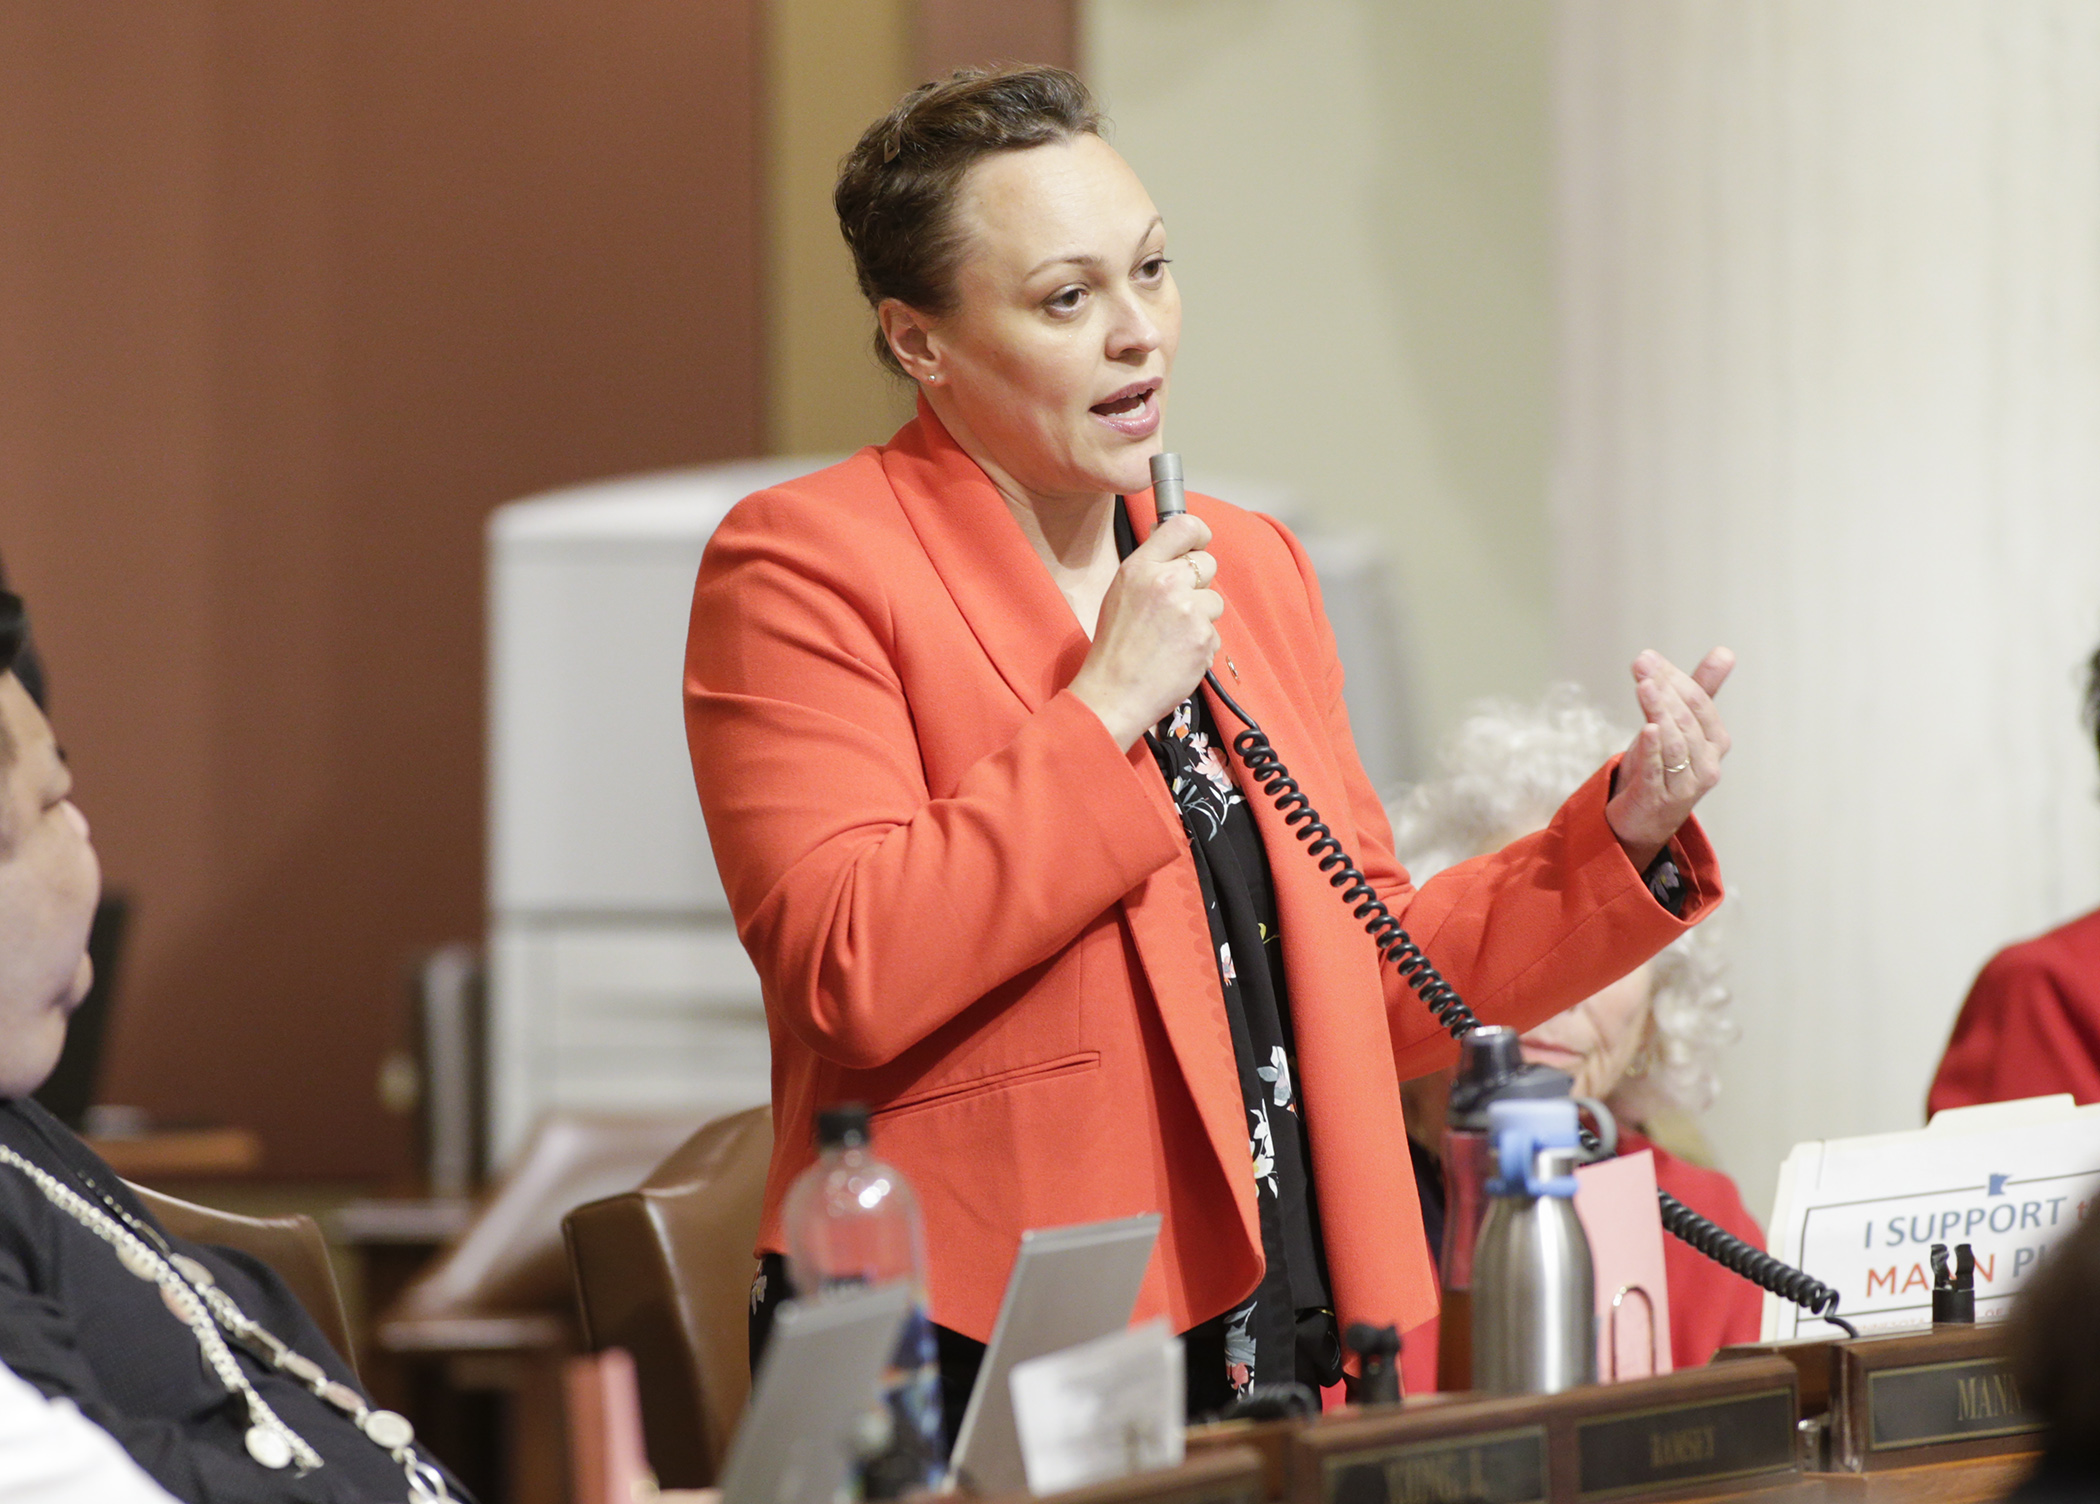 Rep. Alice Mann comments on her bill, SF278, during floor debate May 9. The bill would require licensure of pharmacy benefit managers. Photo by Paul Battaglia